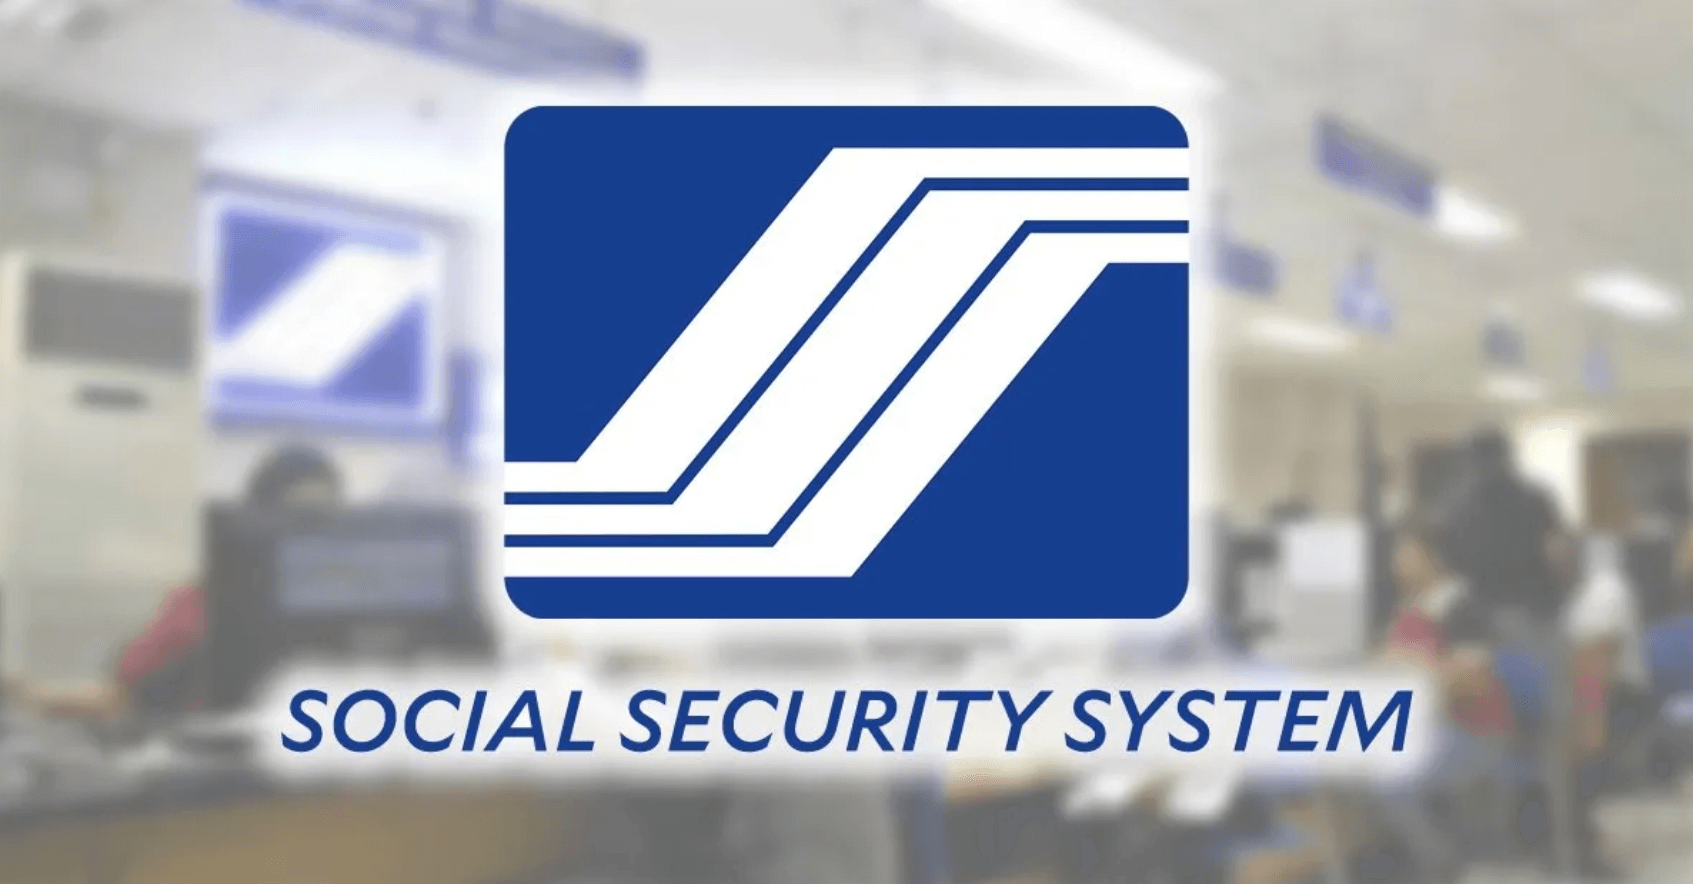 SSS educational loan requirements